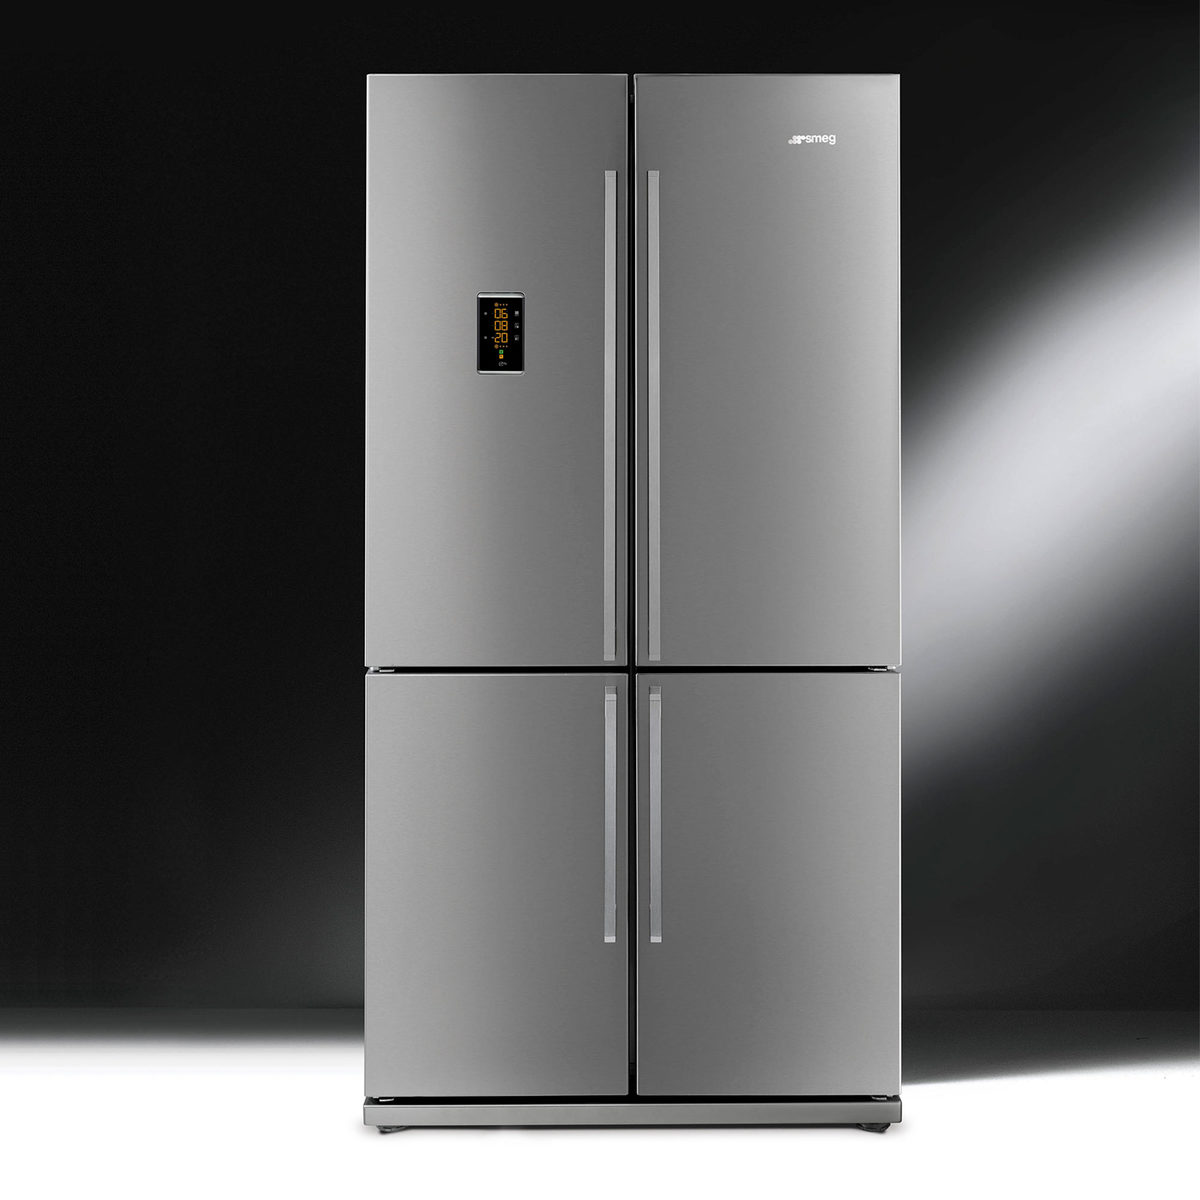 Smeg FQ60XPE, Multidoor Fridge Freezer A+ Rated in Stainless Steel